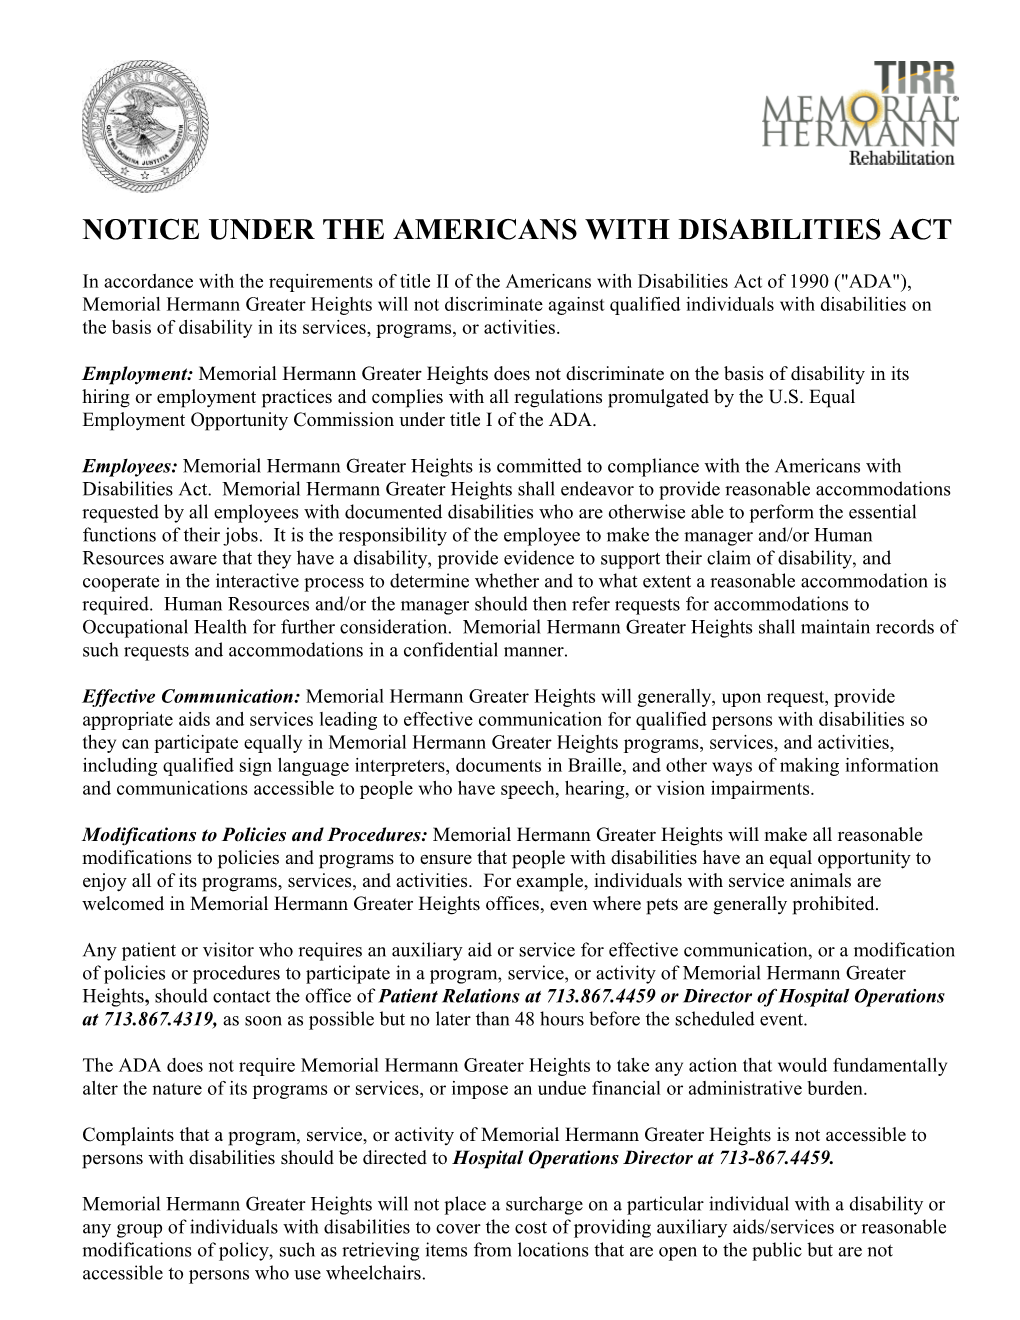 Notice Under the Americans Withdisabilities Act